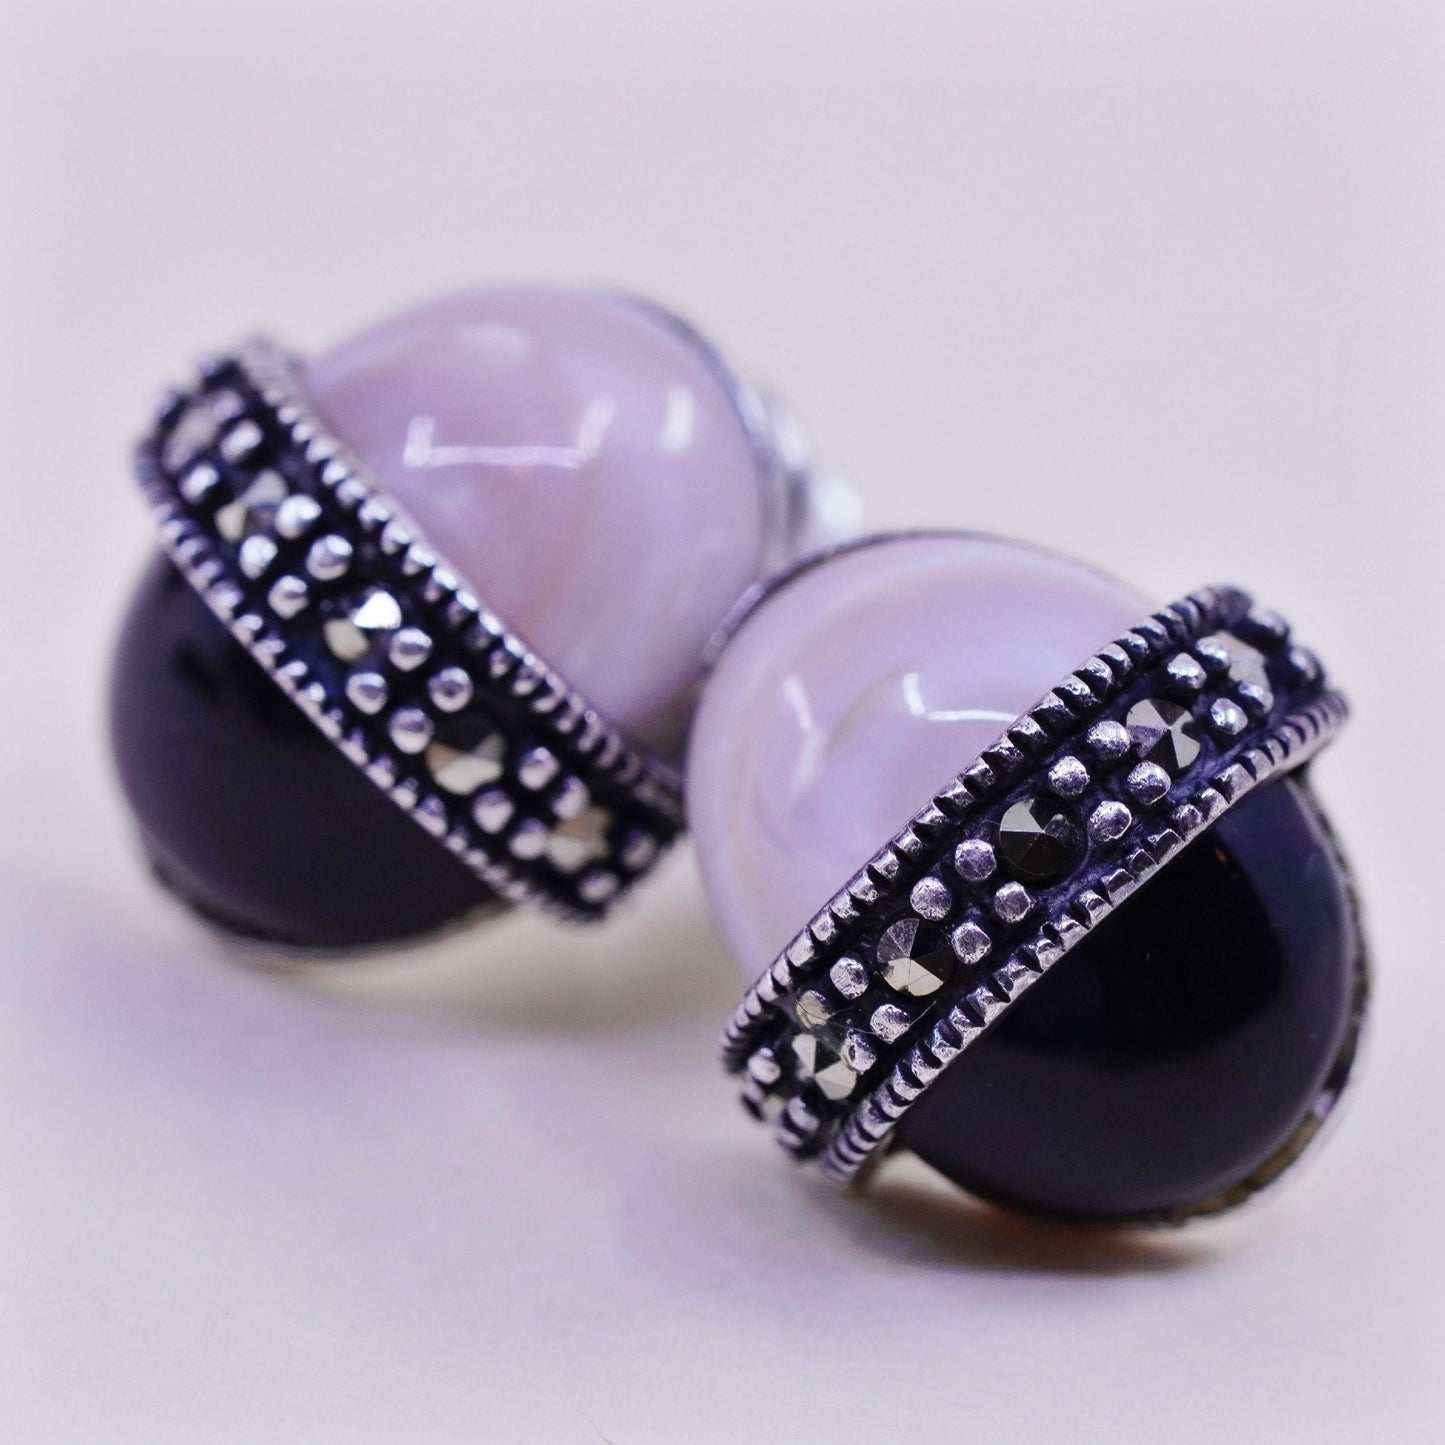 Vintage sterling silver earrings, 925 studs with agate obsidian and marcasite